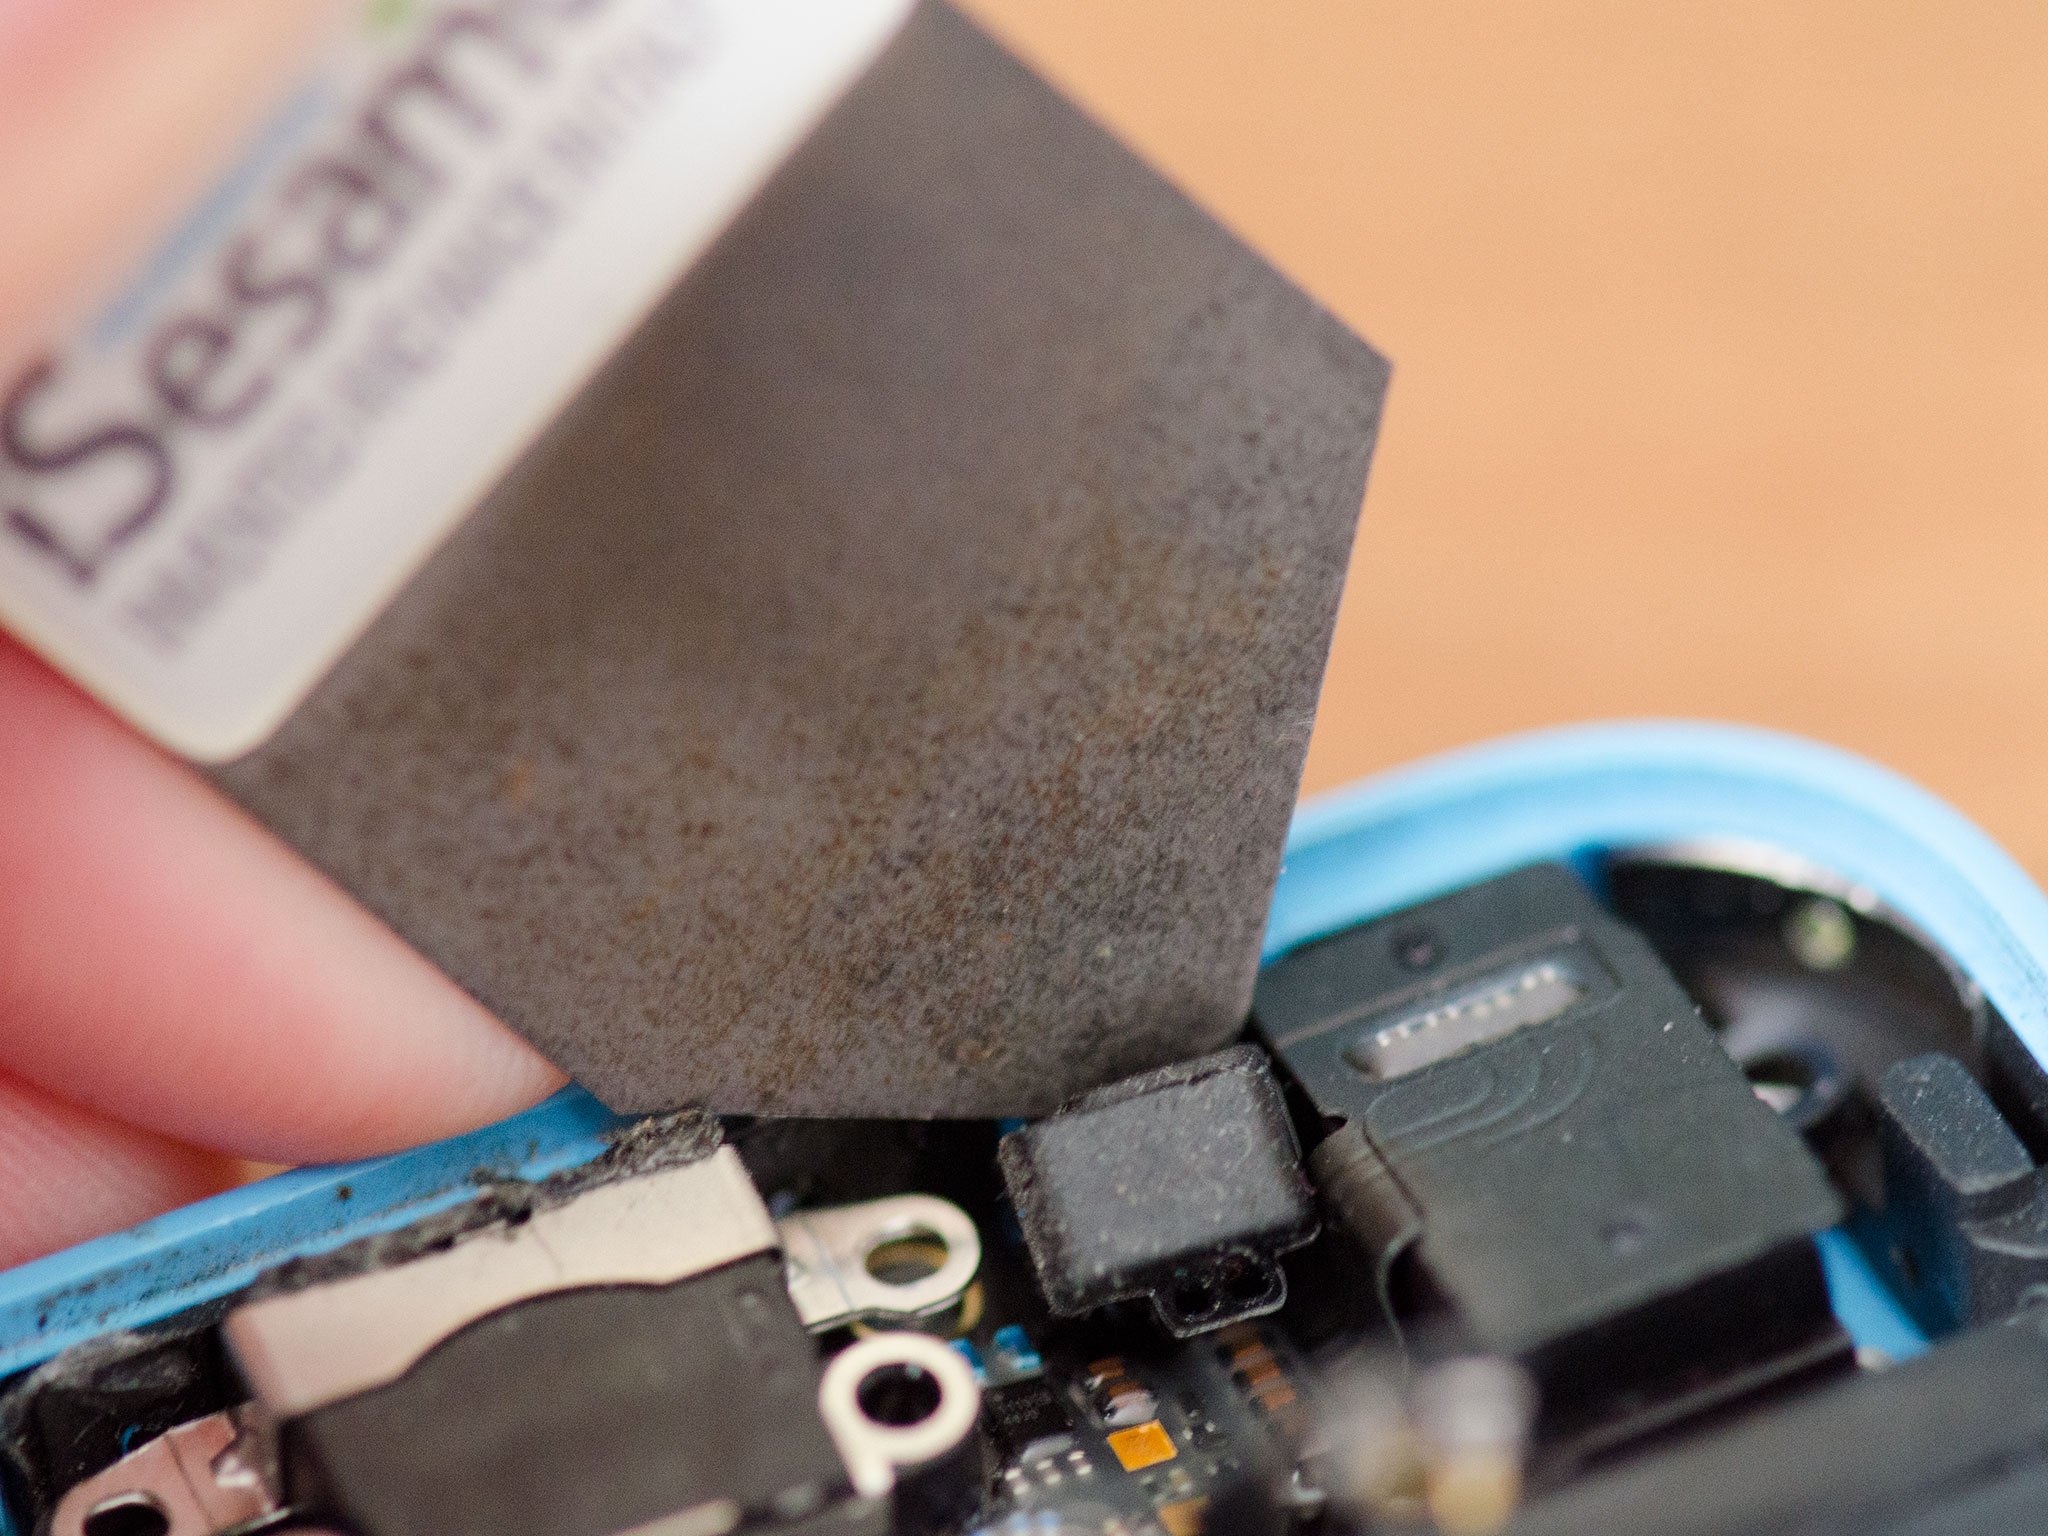 How to DIY replace the Lightning dock in an iPhone 5c